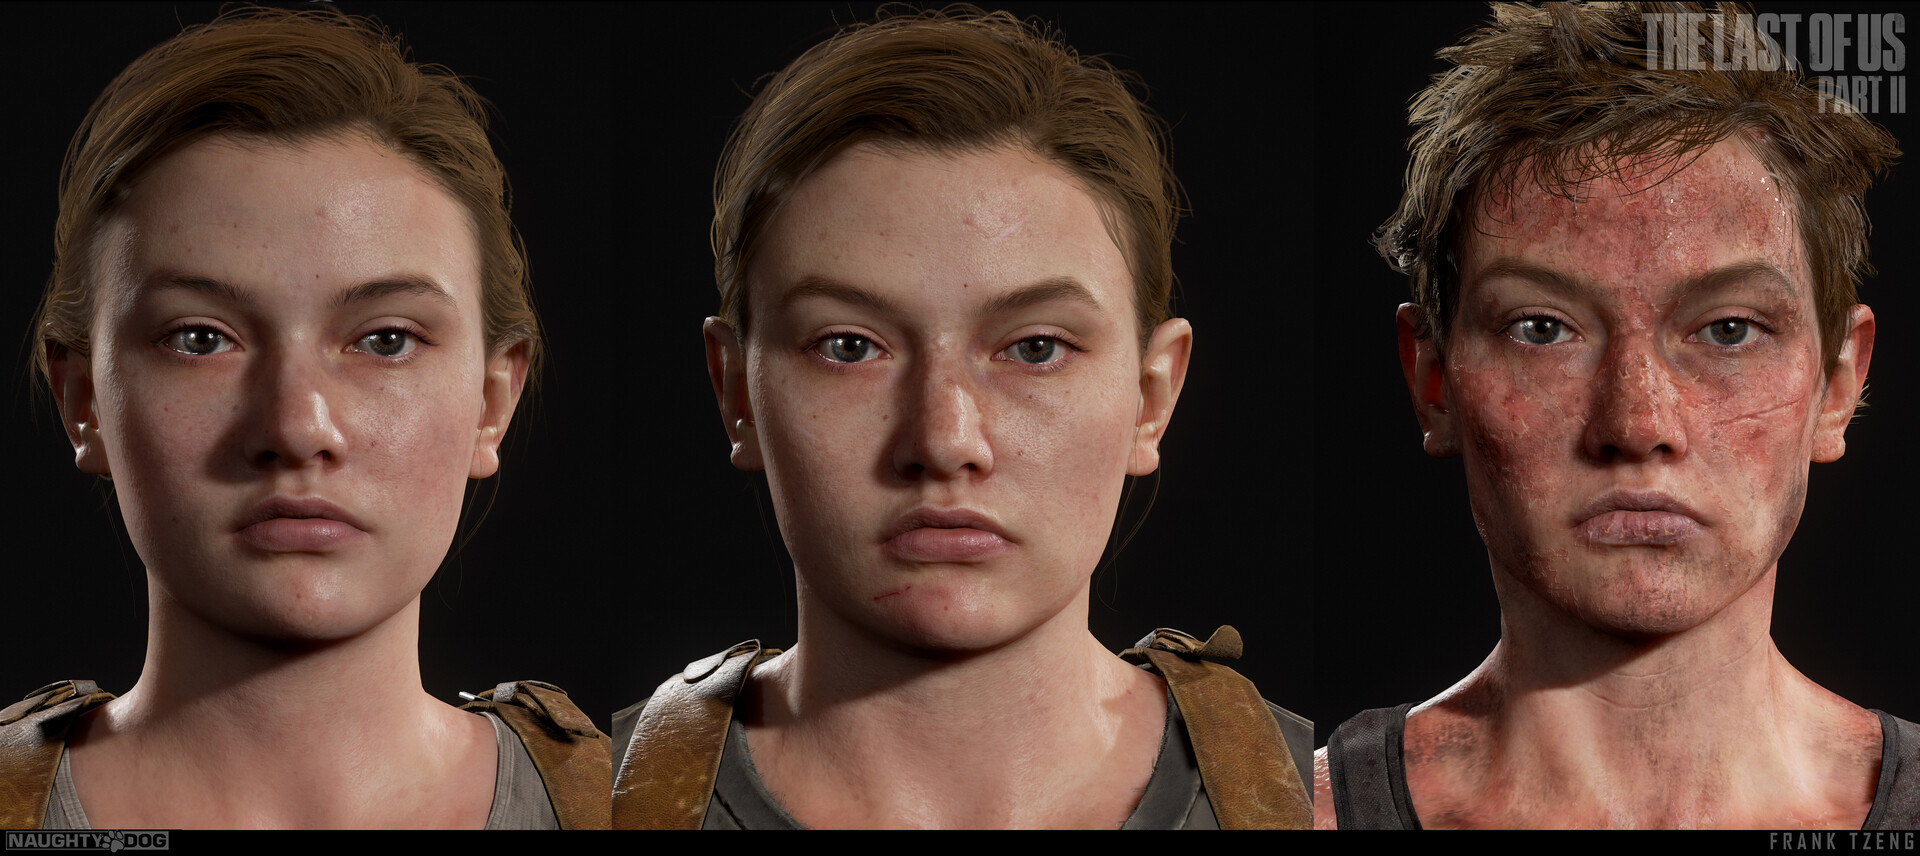 Abby fan concept for The Last of Us Part III (by AbbyStanAccount) :  r/thelastofus